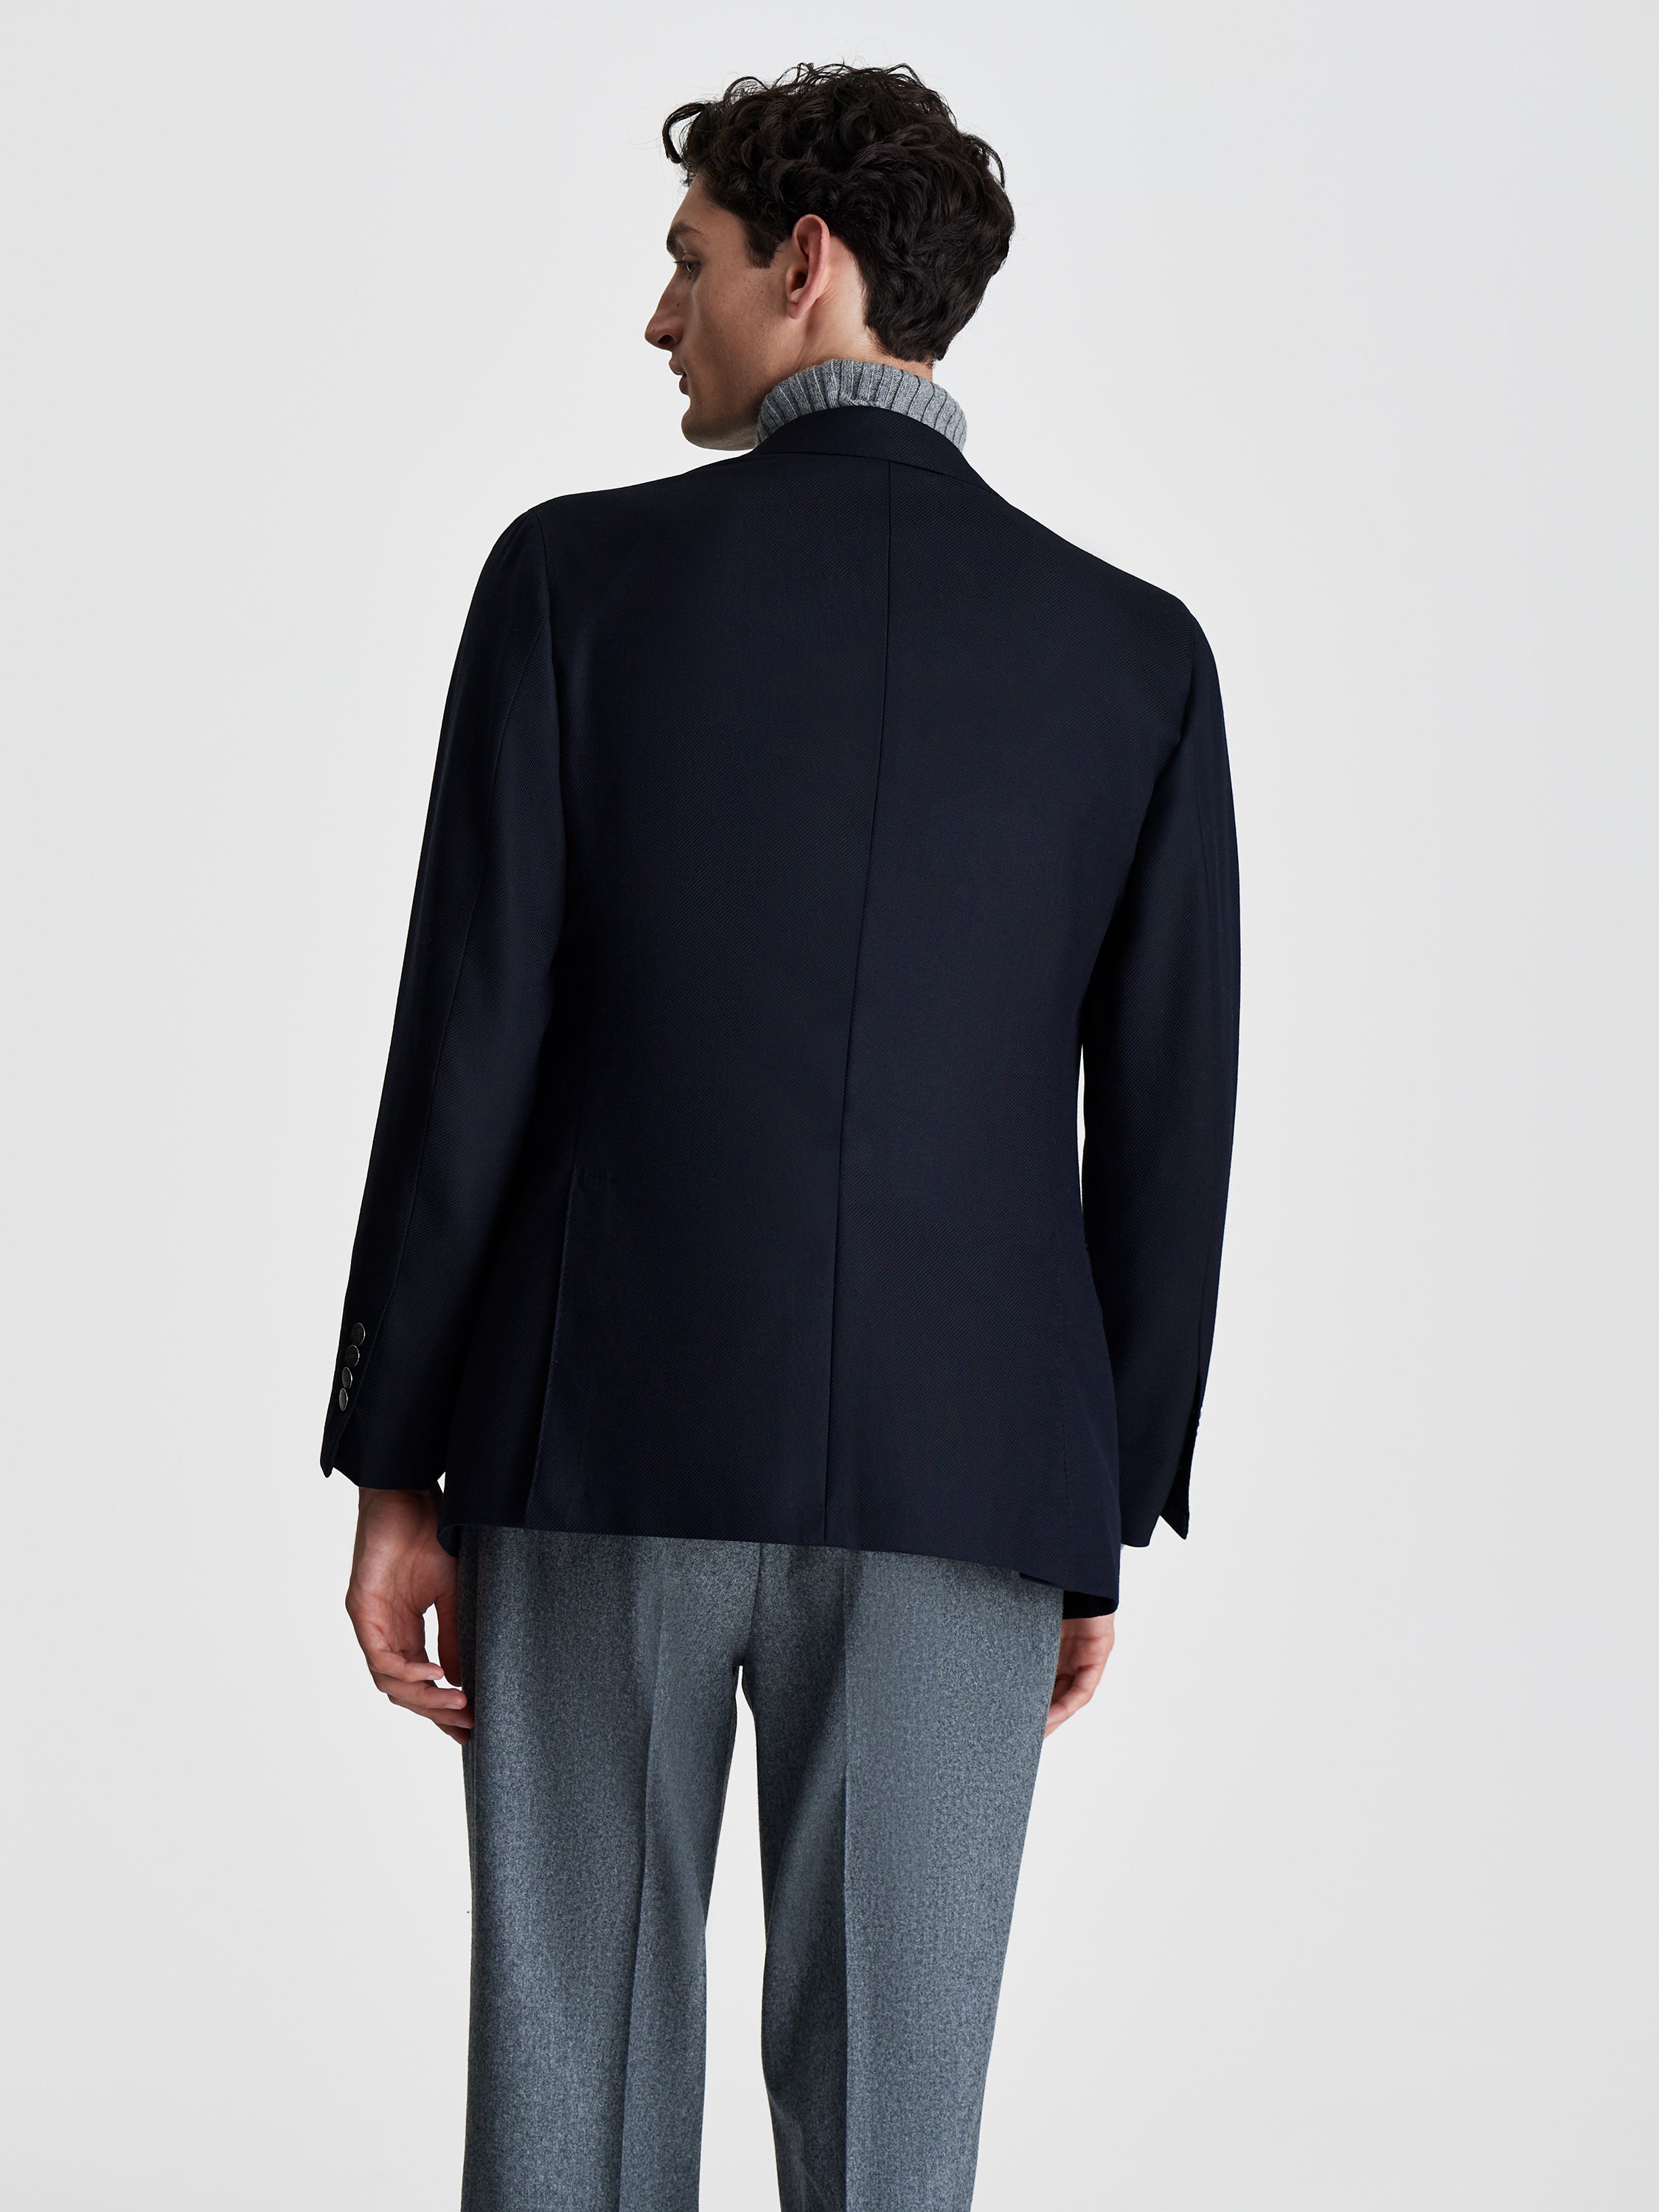 Wool Unstructured Single Breasted Jacket Navy Back Cropped Model Image